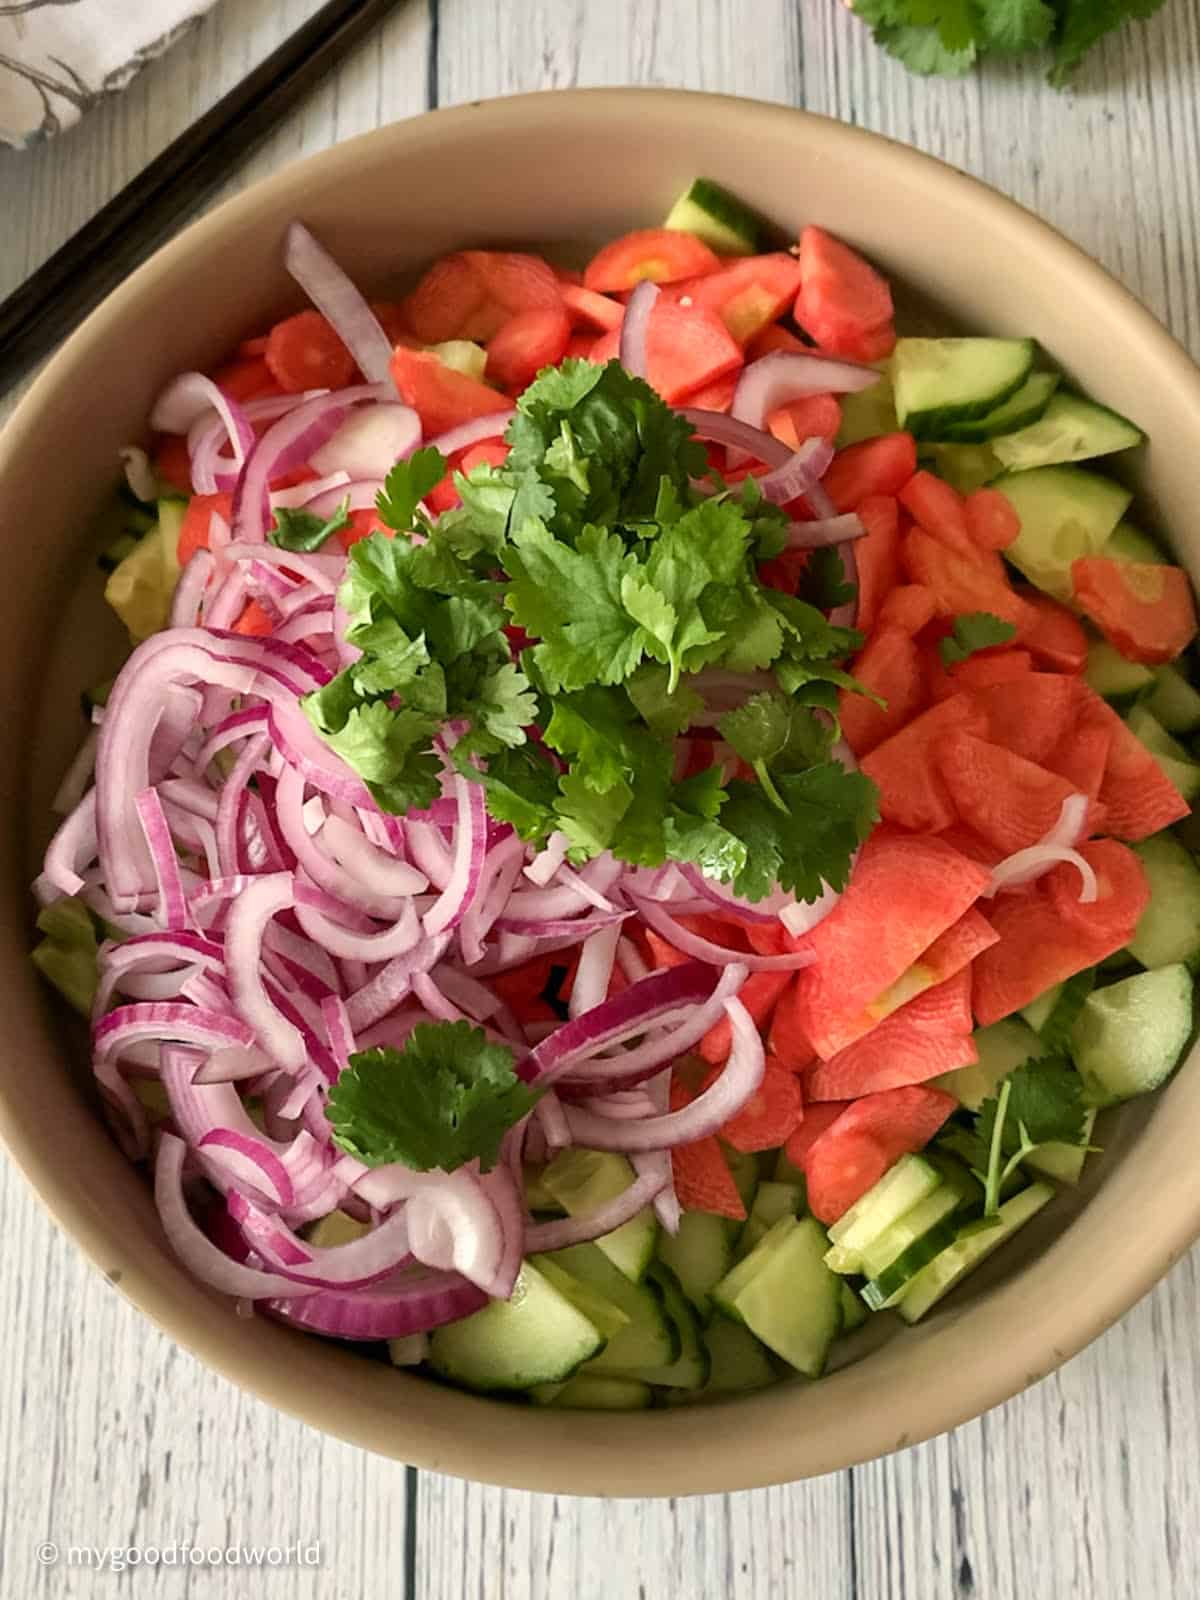 Thinly sliced cucumbers, carrots, and red onion are placed in a wide bowl. Some chopped fresh cilantro is placed on top of the sliced veggies.